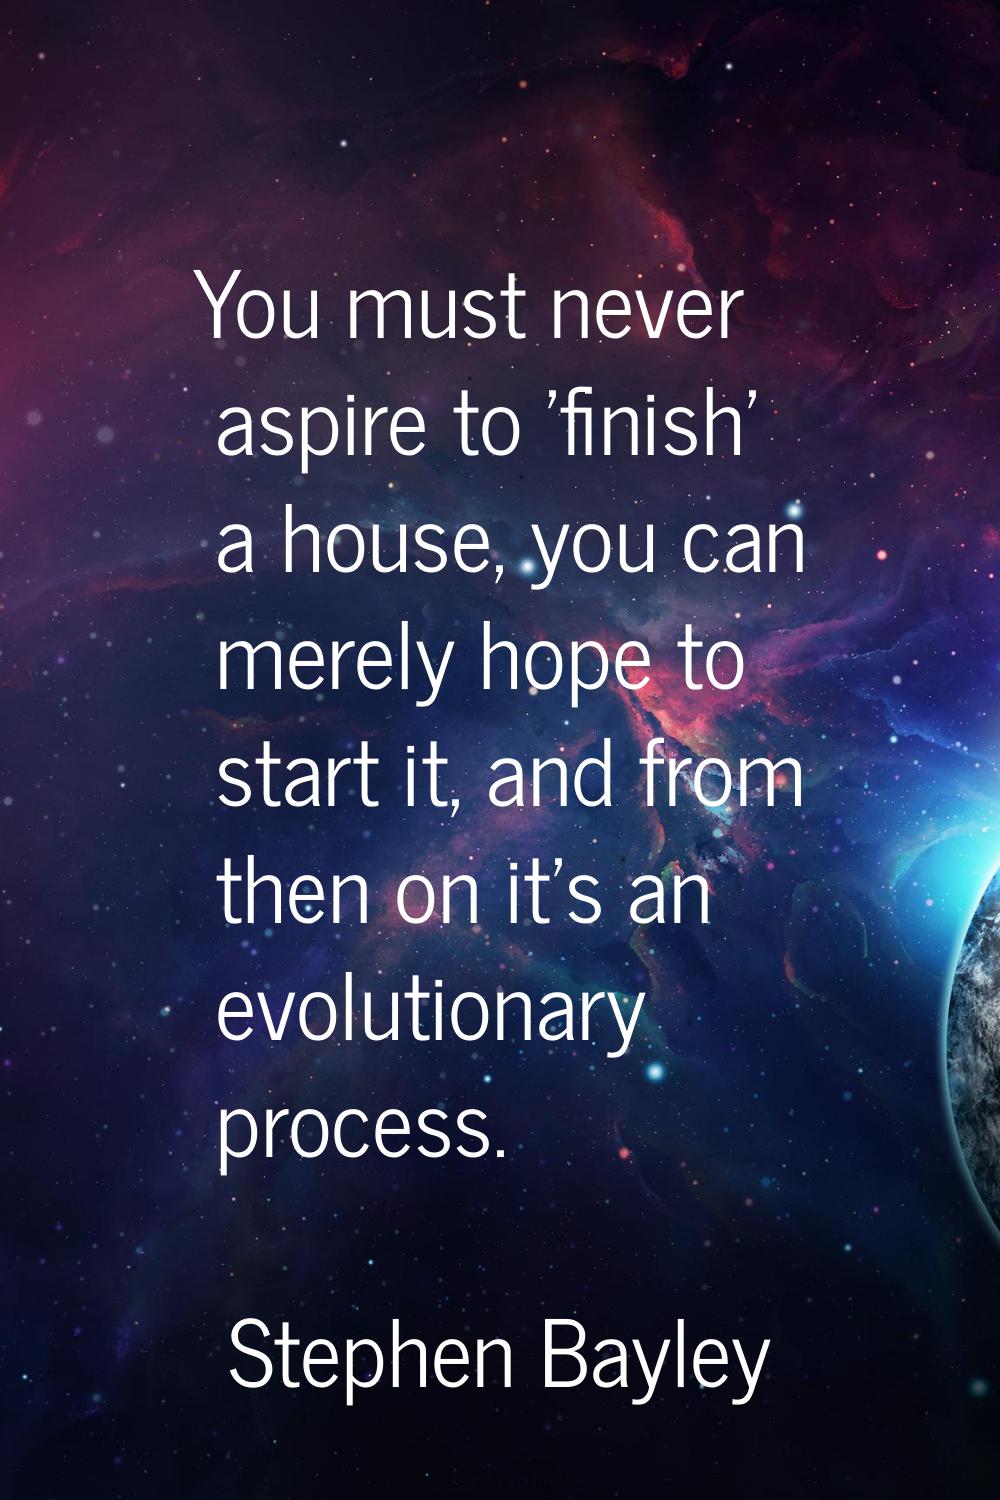 You must never aspire to 'finish' a house, you can merely hope to start it, and from then on it's a